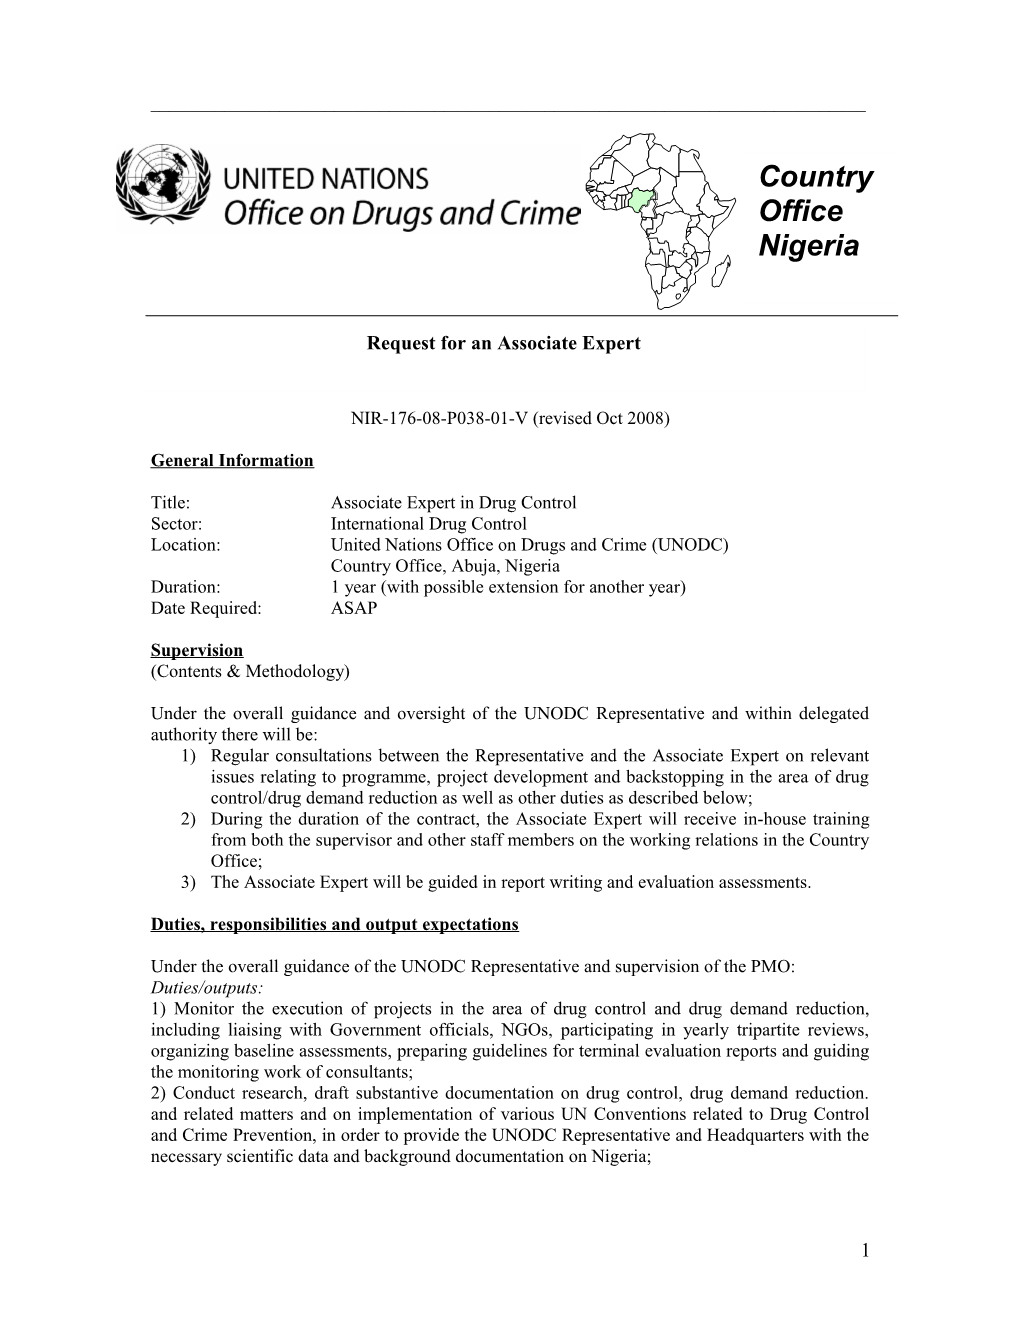 United Nations Office On Drugs And Crime (Unodc)